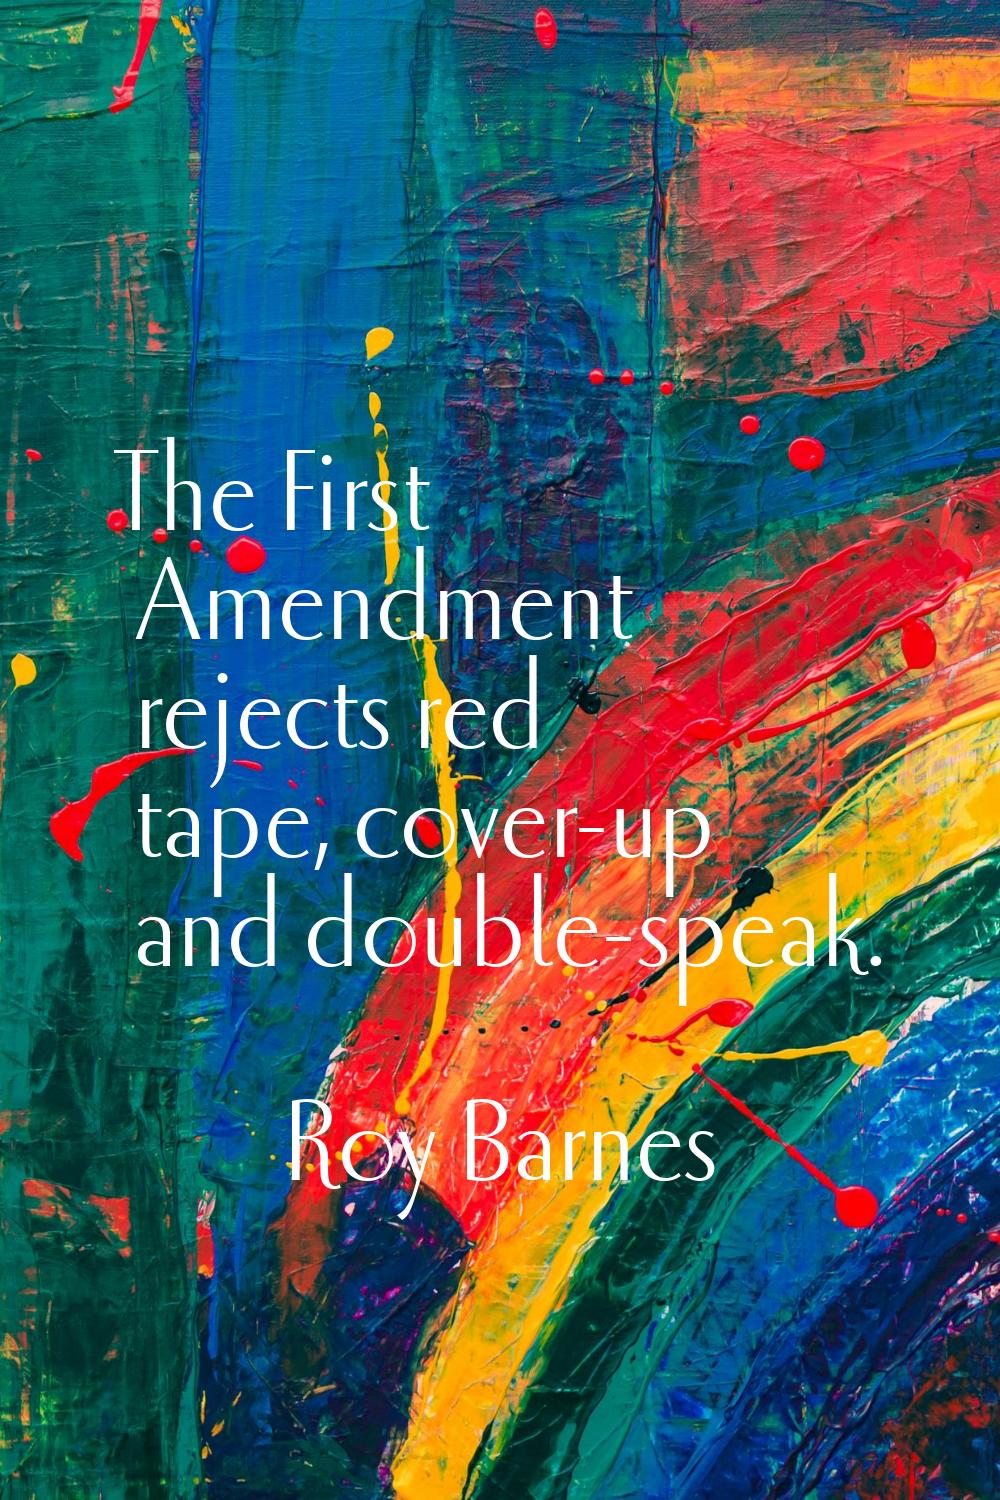 The First Amendment rejects red tape, cover-up and double-speak.